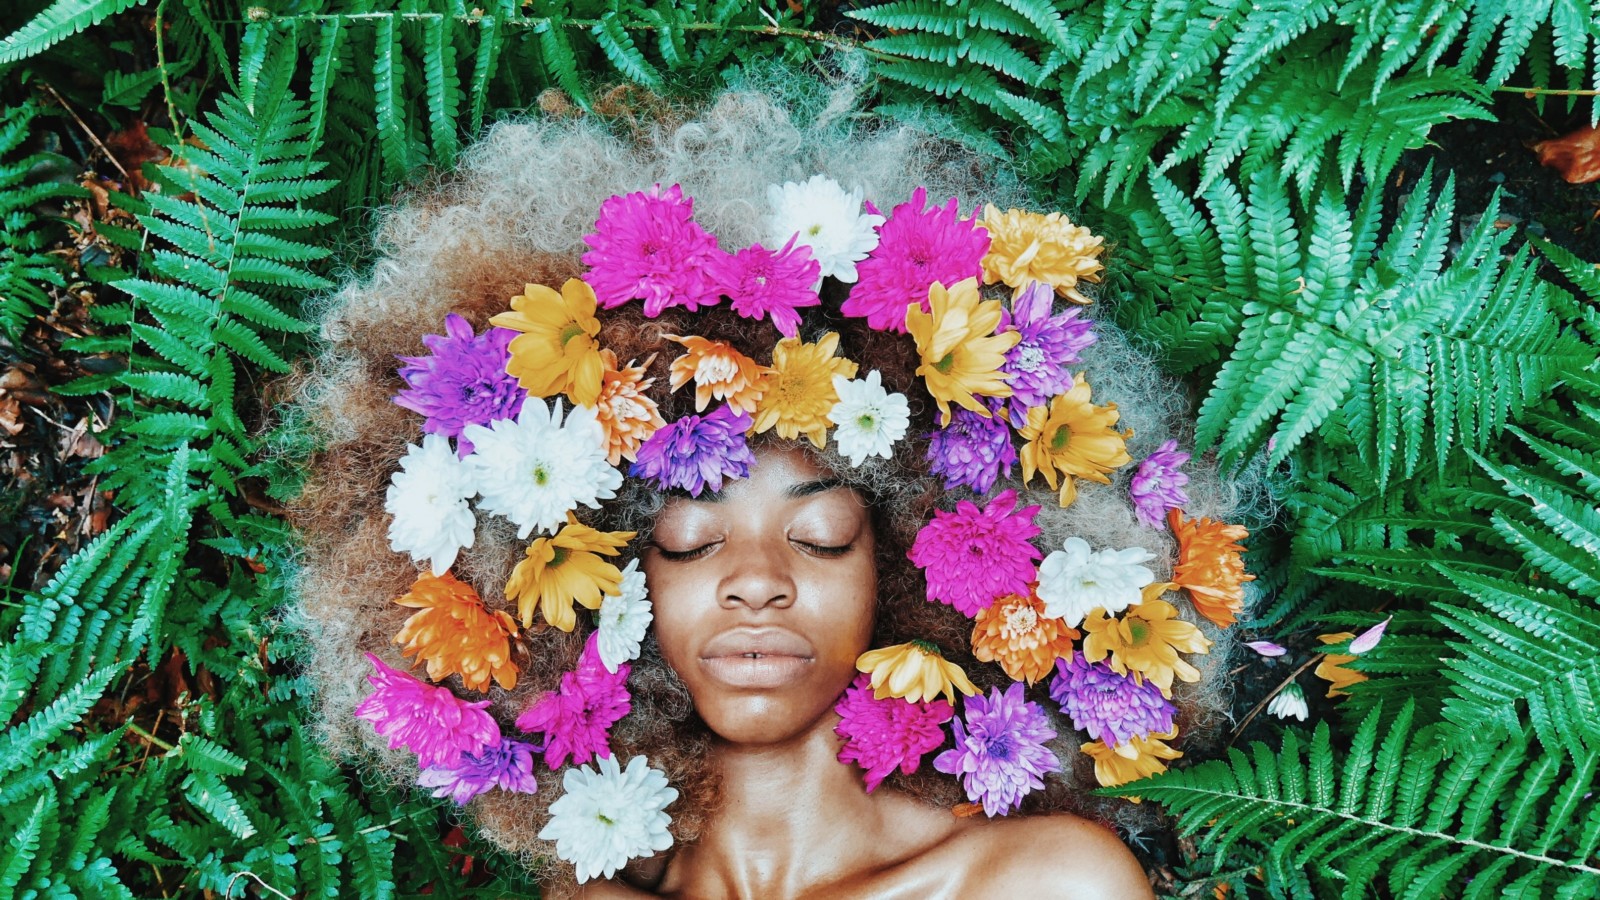 Black woman with flowers in her hair surrounded by plants.